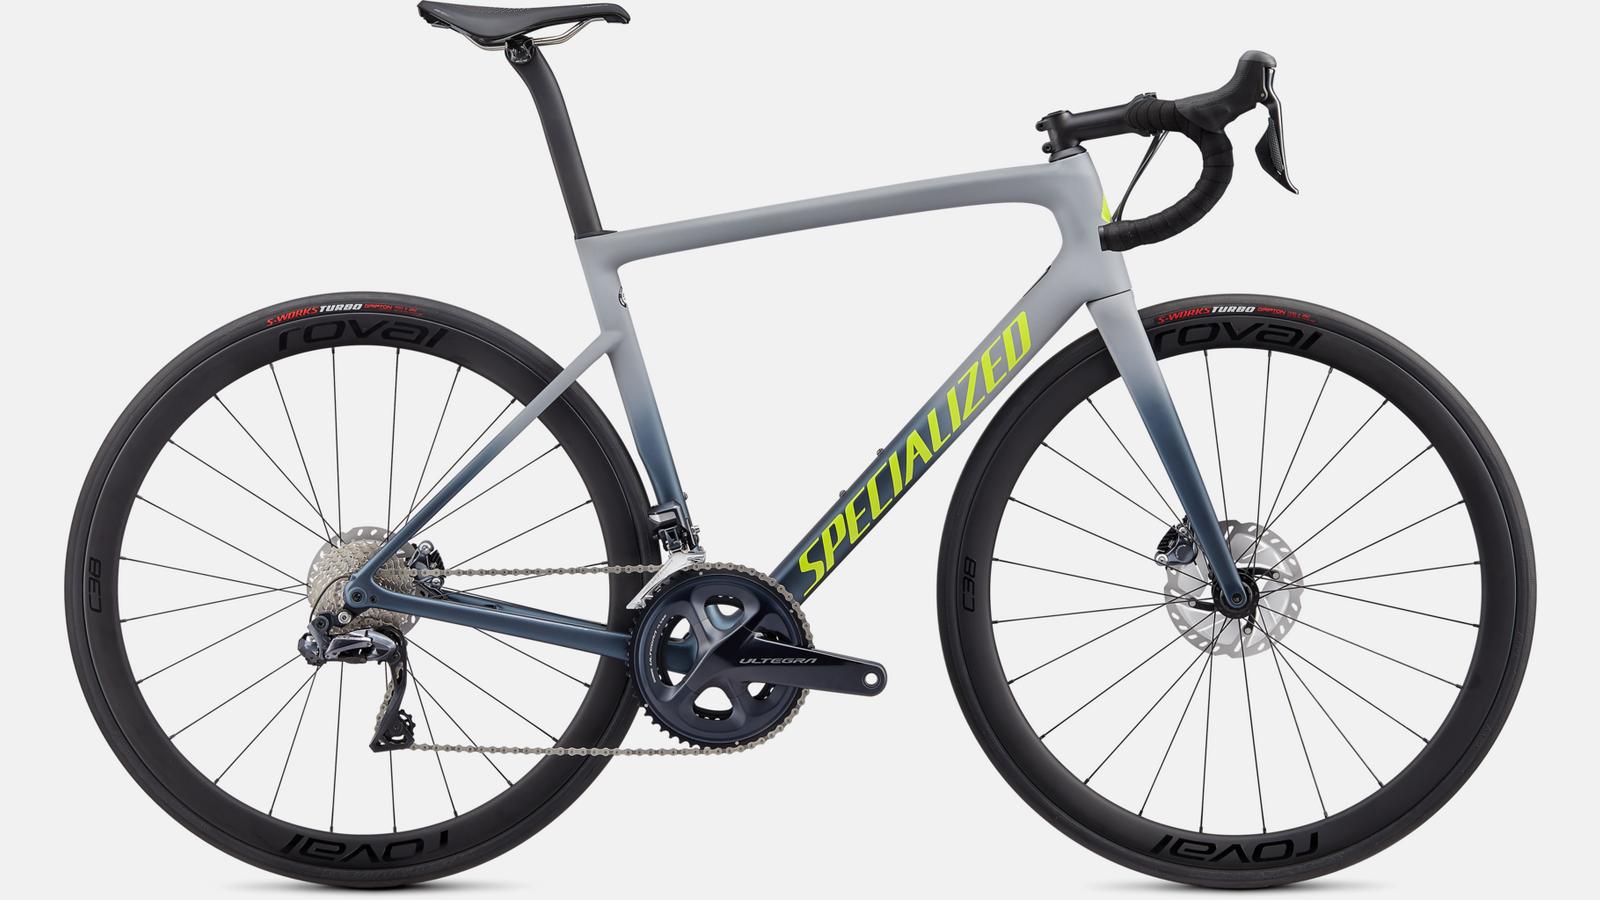 Paint for 2020 Specialized Tarmac SL6 Disc Expert - Satin Cool Grey